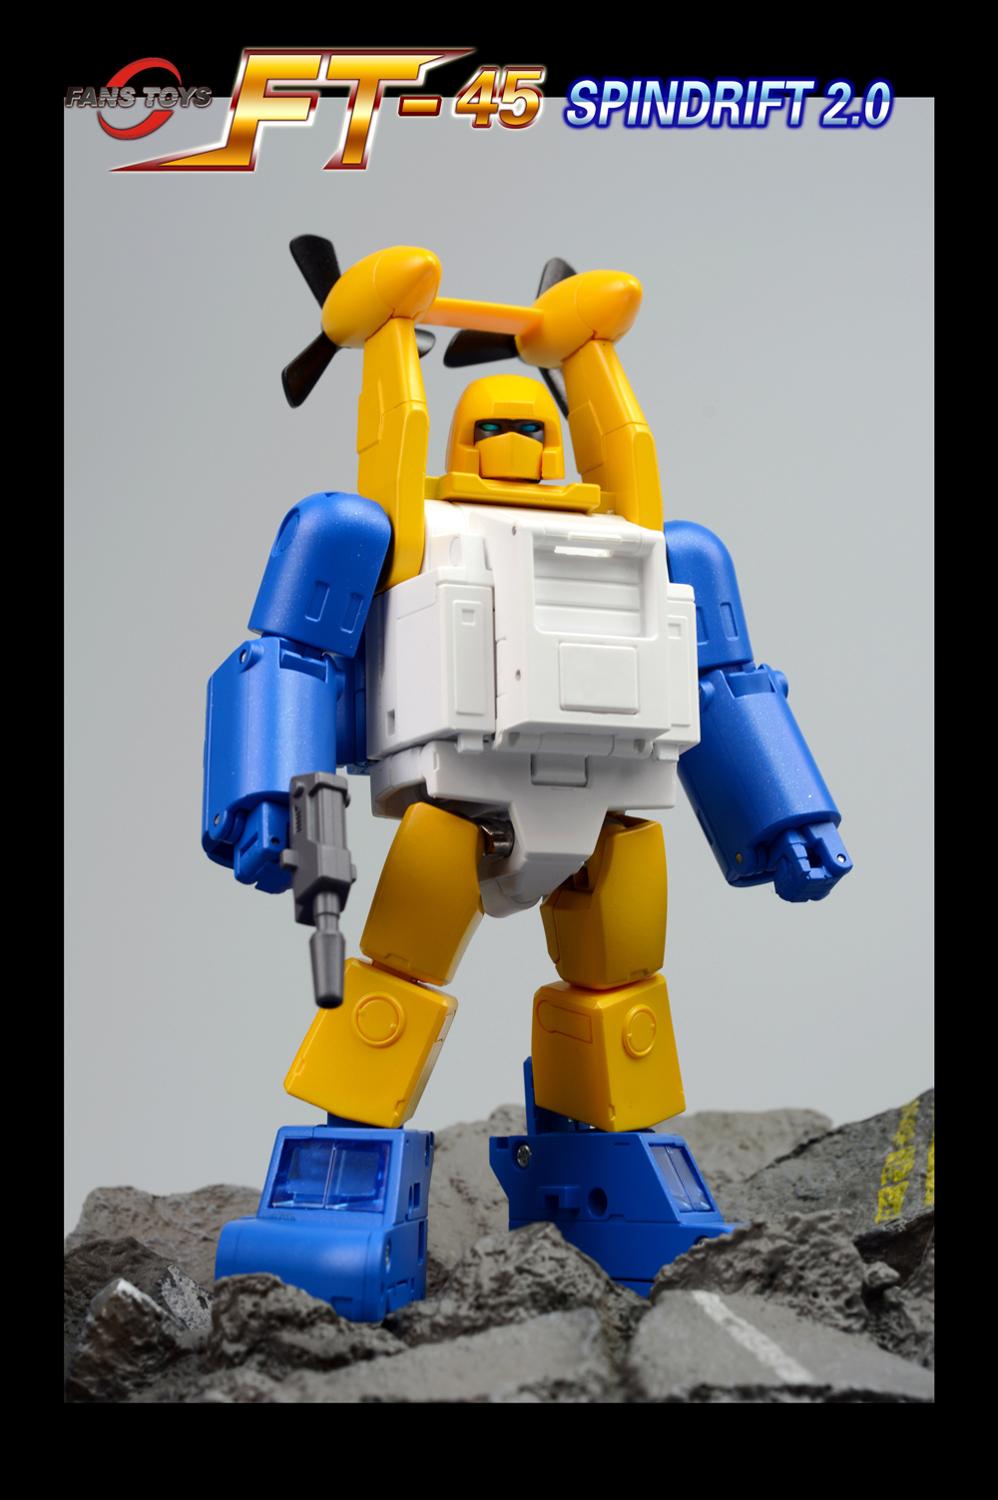 FansToys FT-45 FT45 Spindrift Seaspray Version 2.0 Action Figure 3rd Party Transformation Robot